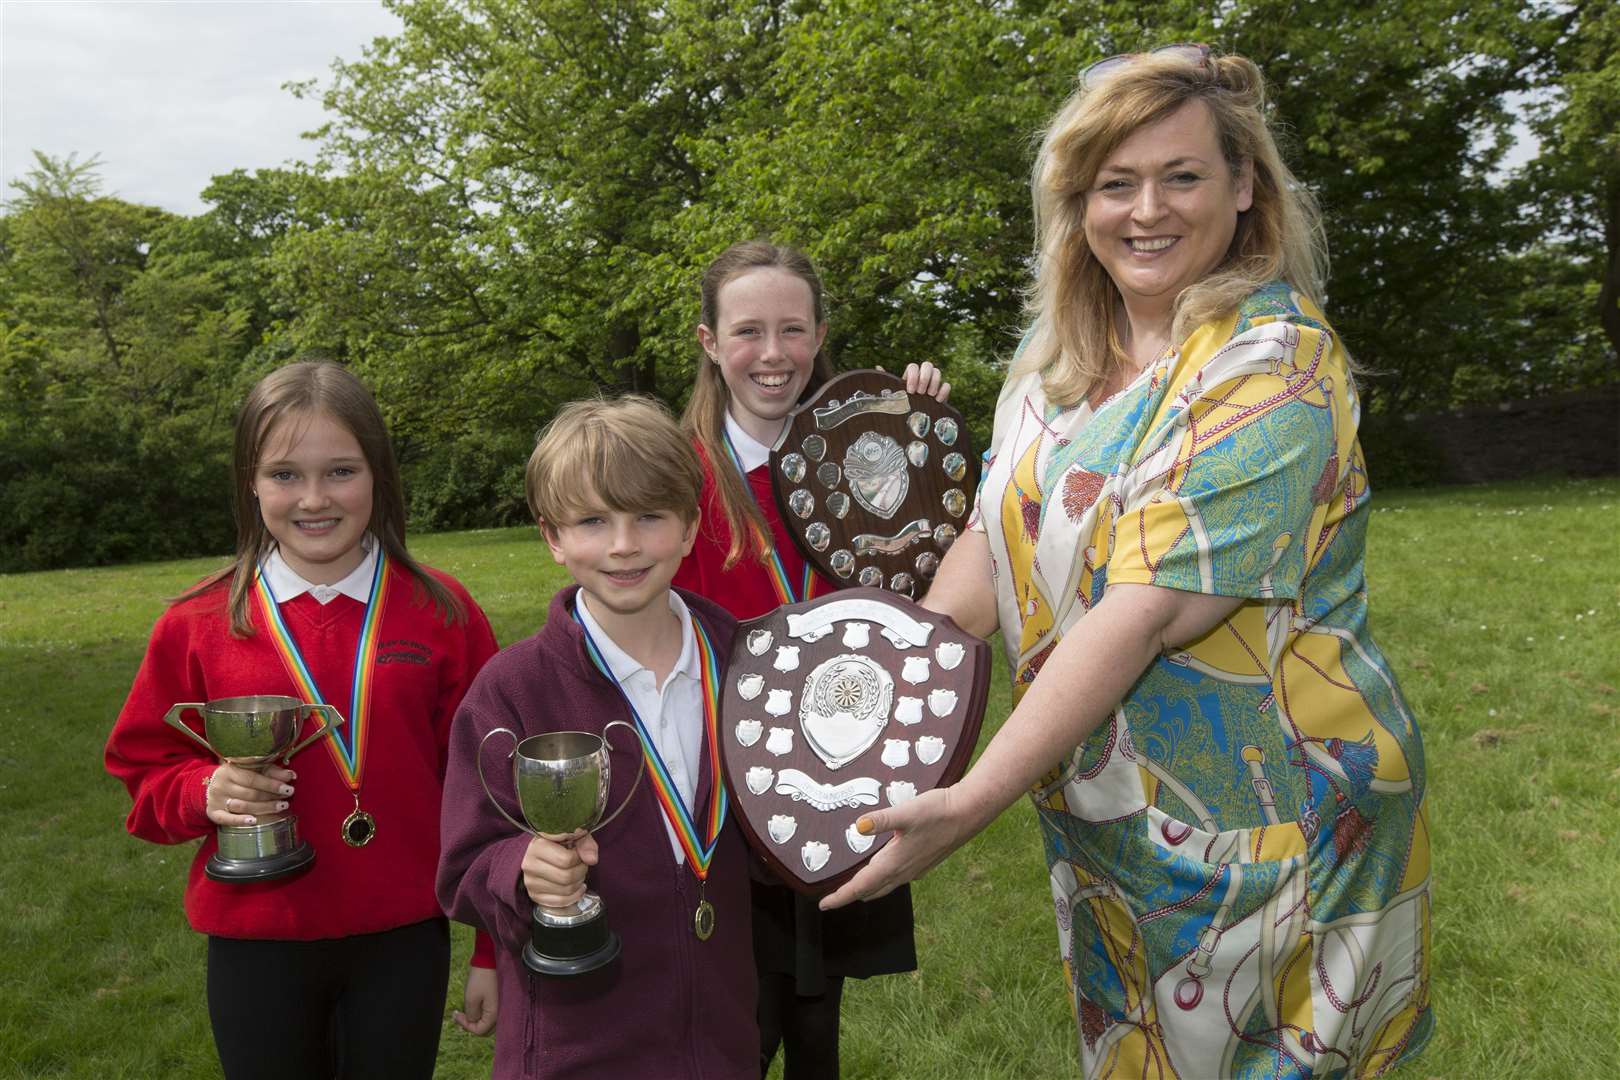 The Thurso and District Round Table Shield, the overall trophy for verse speaking, was won by Oliver Hall, receiving the trophy from adjudicator Rebecca Vines. Oliver also won the Stroma Cup in the P5 section, while Emily Sutherland (left) won the Edgar Cup for P7 and Emily Mackenzie received the Wick Town Improvements Shield for P6. Picture: Robert MacDonald / Northern Studios